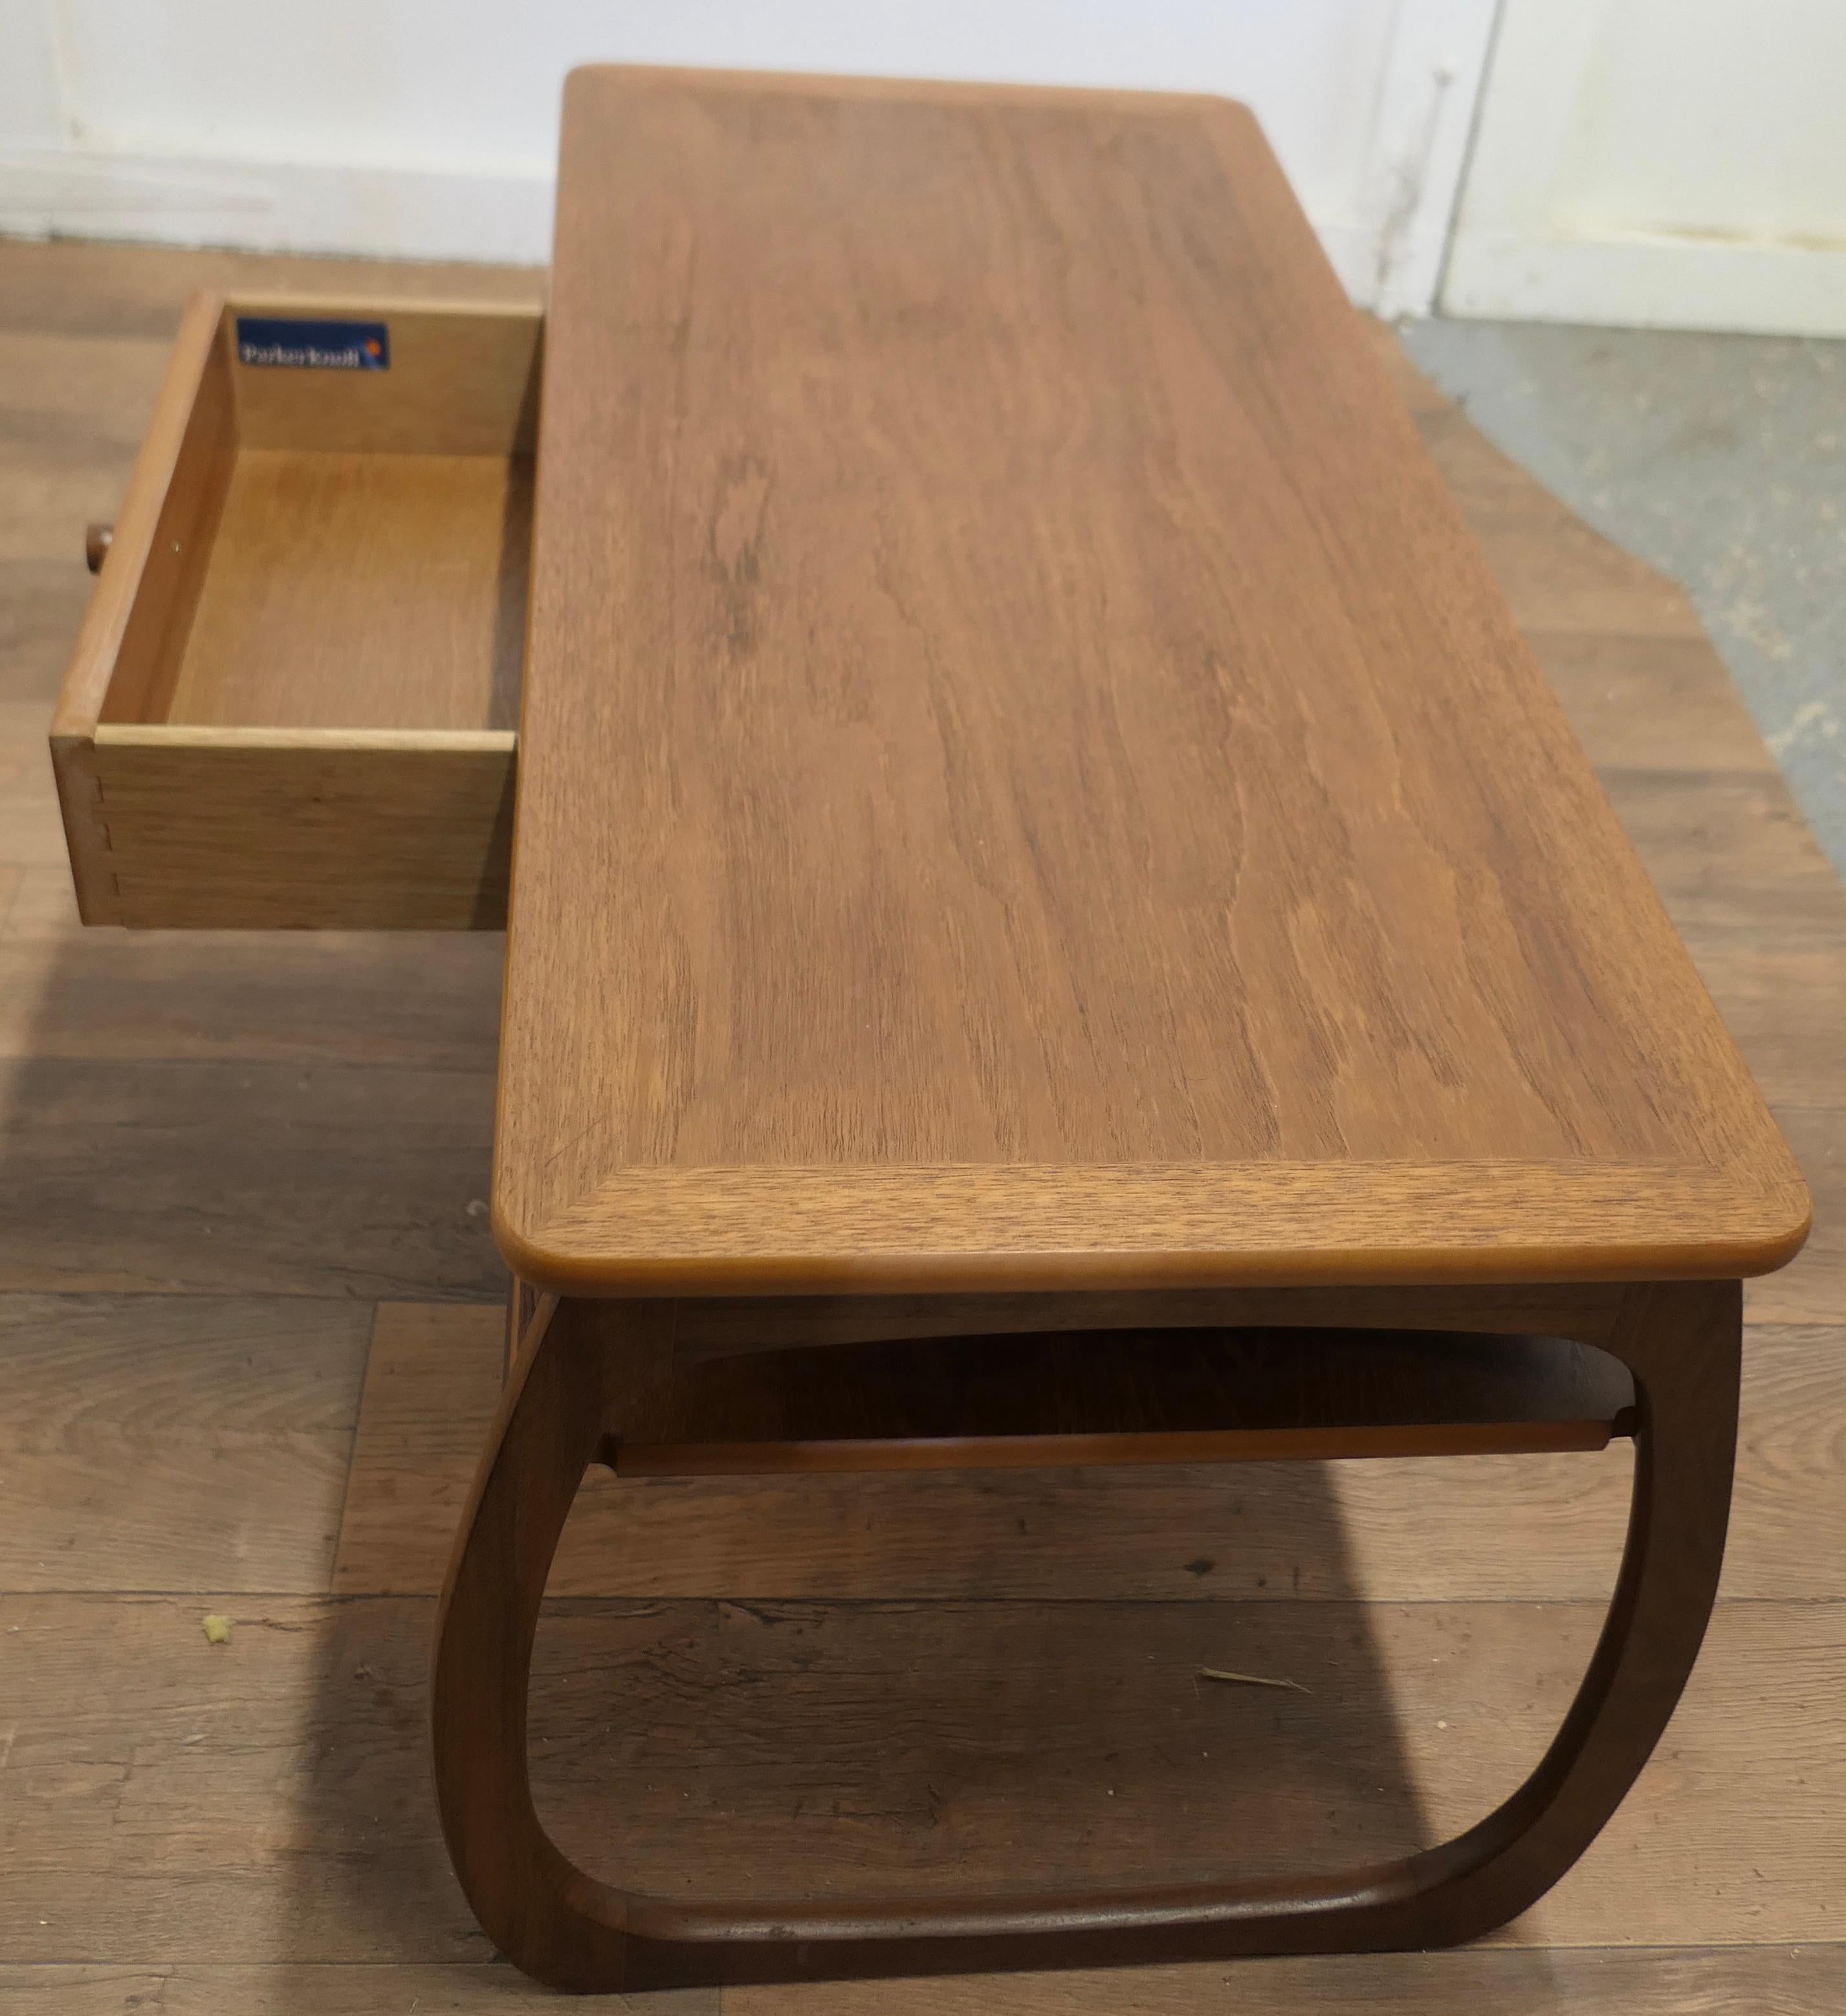 Teak Long 1950s Parker Knoll Cube Shape Coffee Table  This is a good sturdy table  For Sale